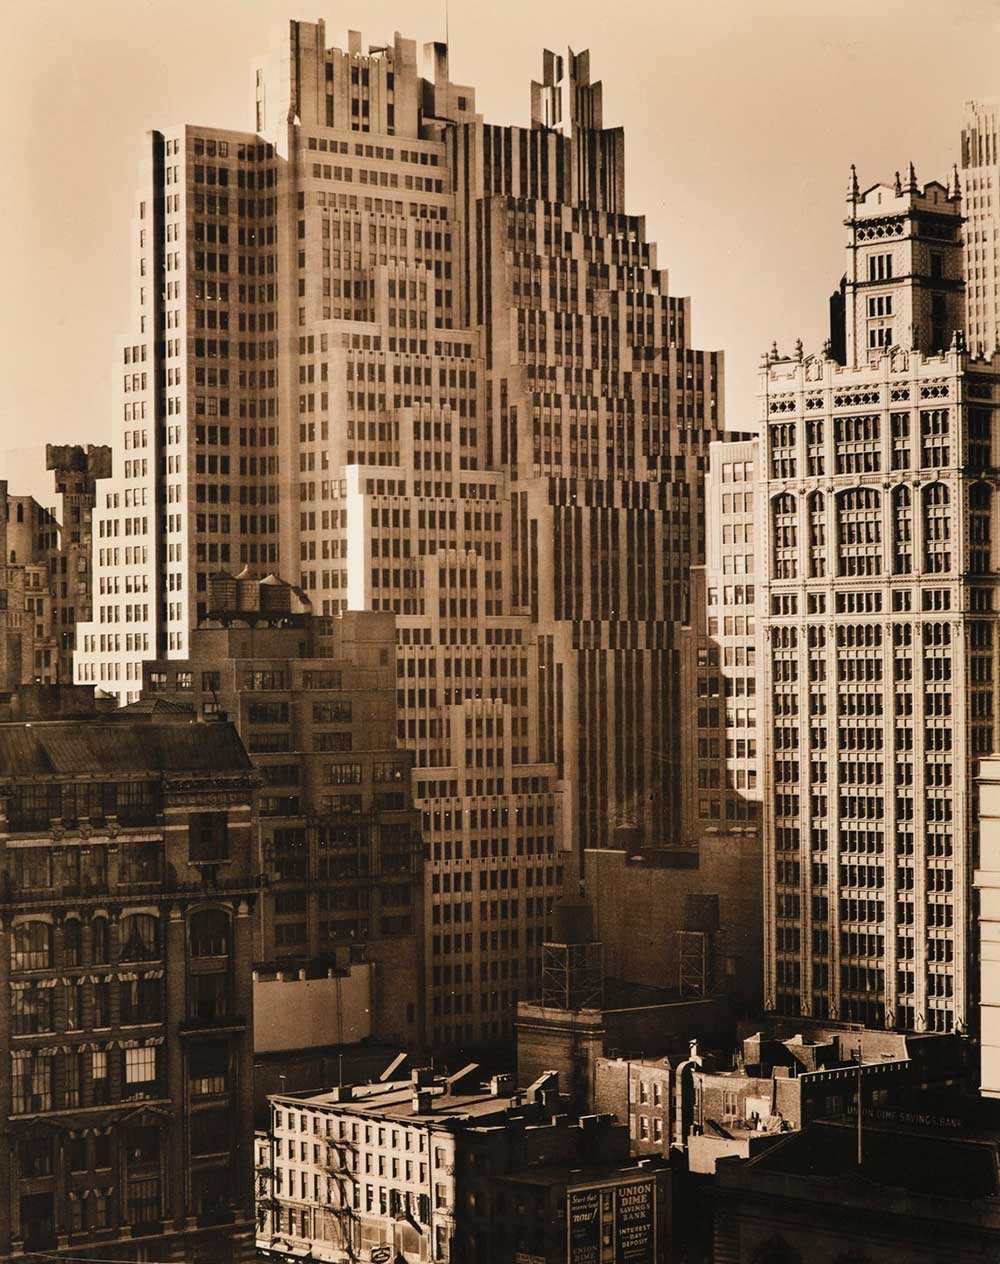 Fortieth Street Between Sixth and Seventh Avenues Looking Southwest From 42nd Street, Manhattan, by Berenice Abbott, 1935.